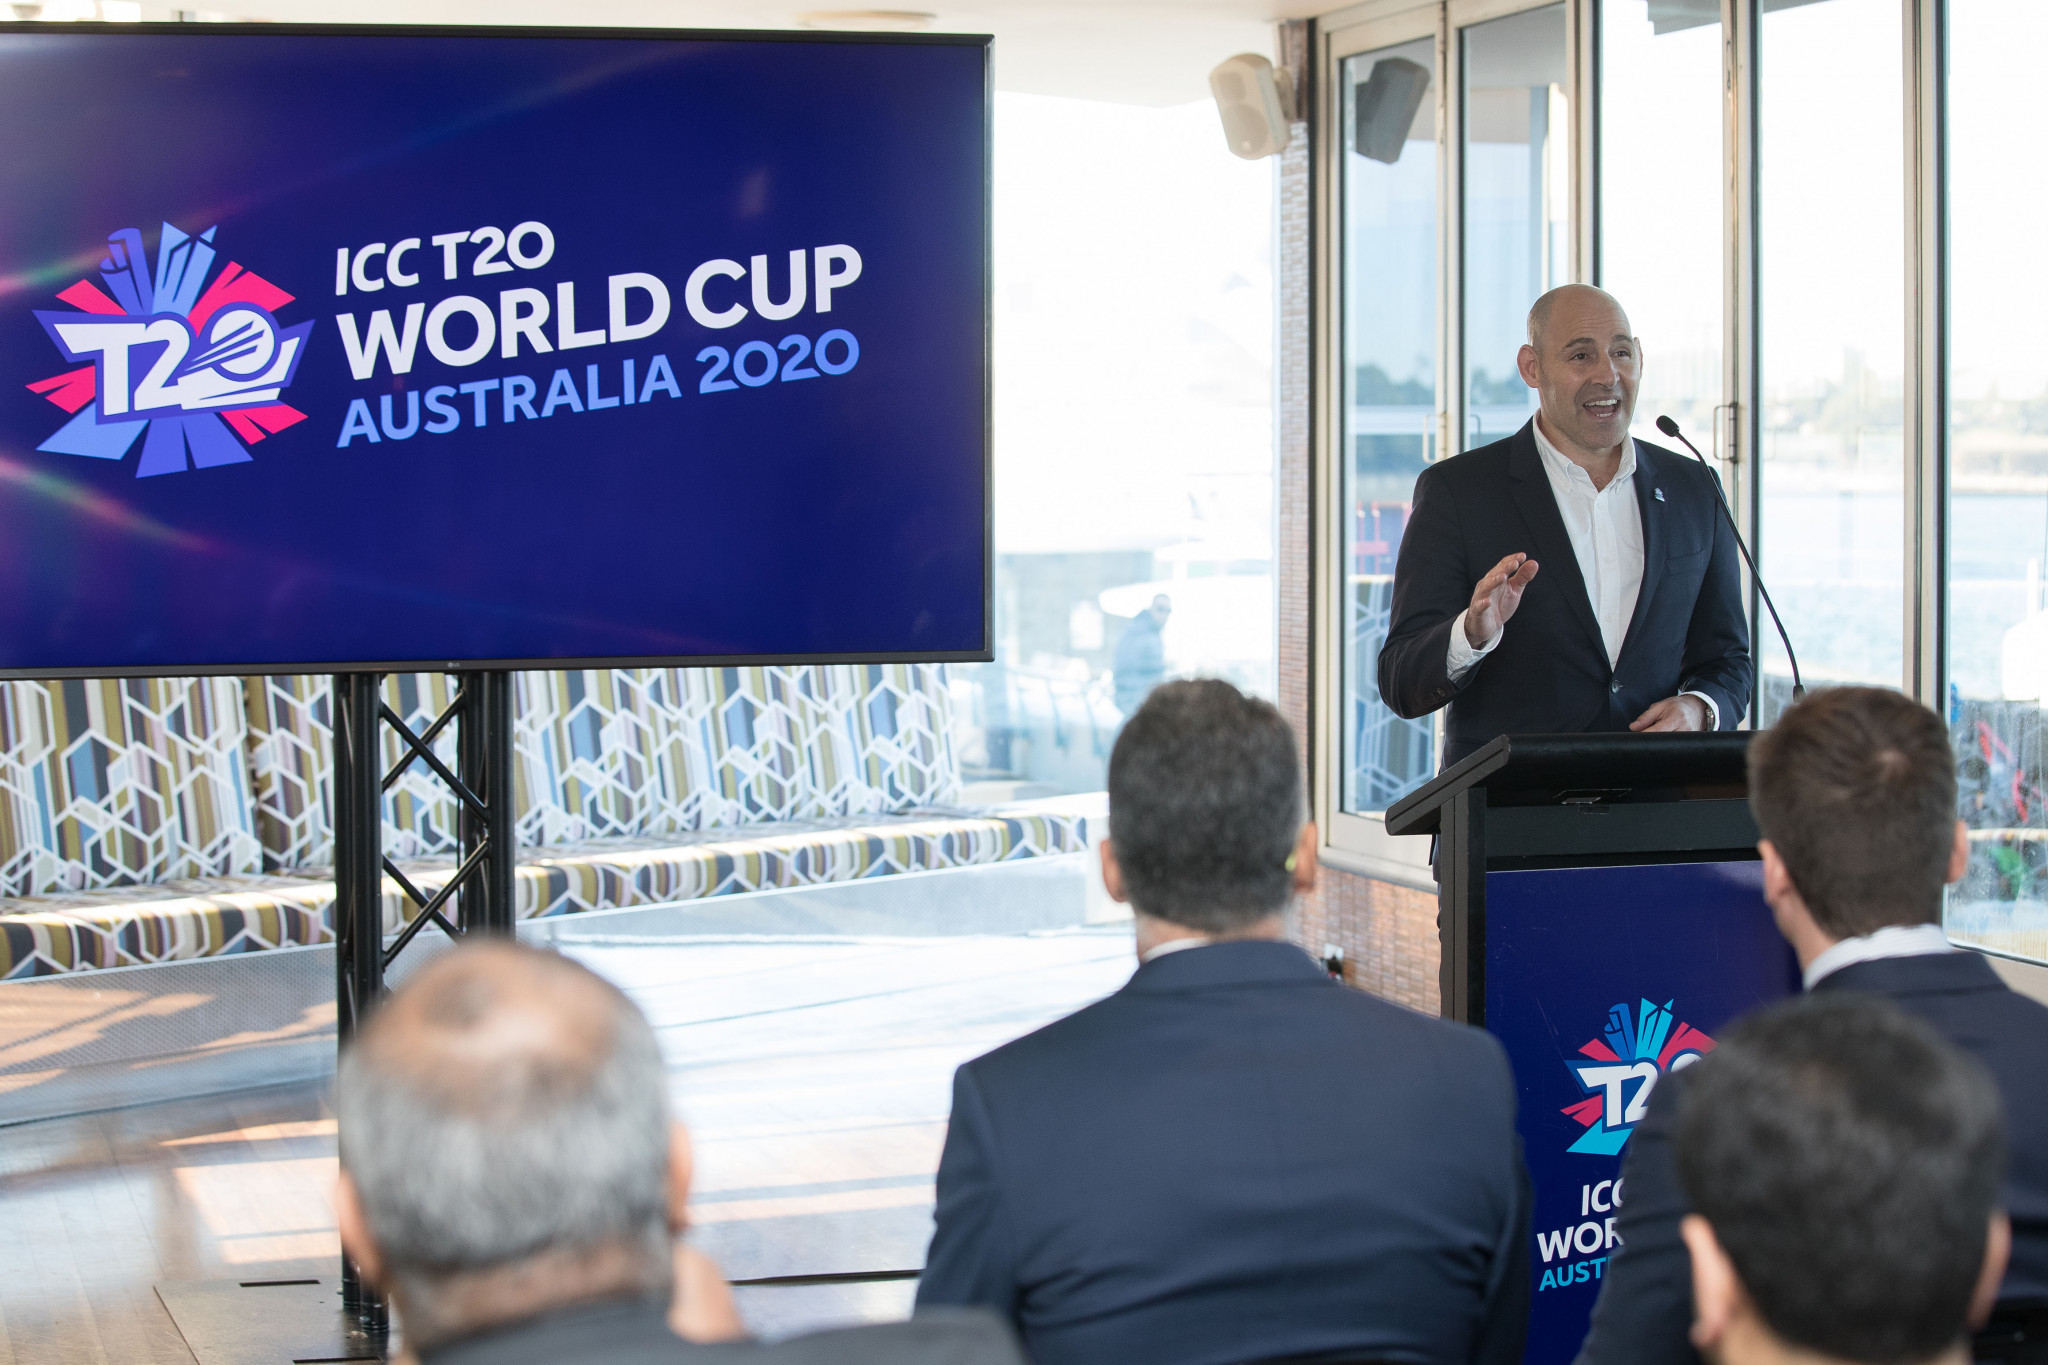 ICC T20 World Cup 2020 Local Organising Committee CEO, Nick Hockley announcing ticket prices for T20 World Cup ©Getty Images